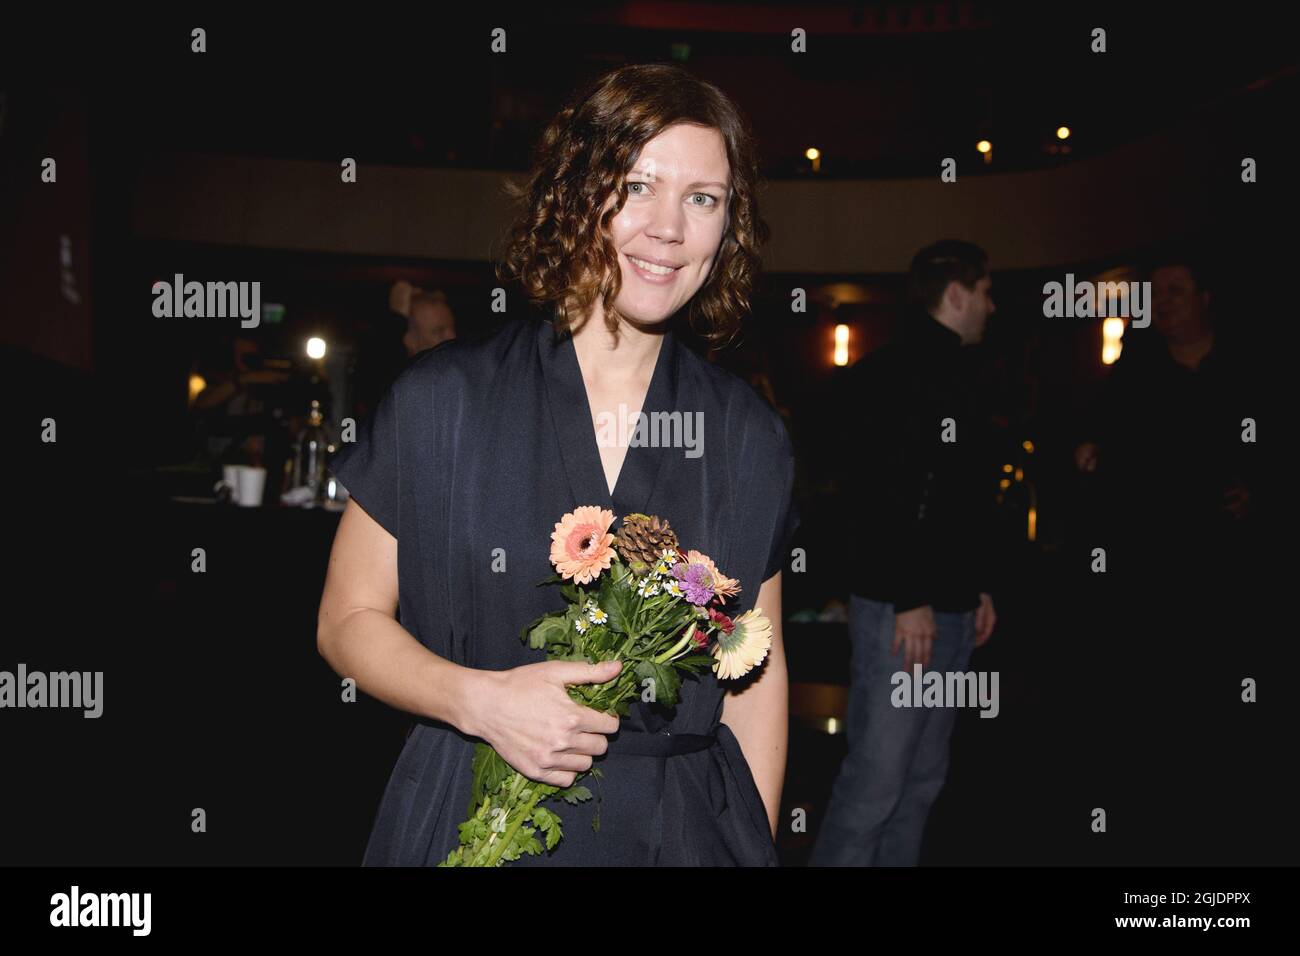 Director Amanda Kernell in Stockholm, Sweden, November 03, 2020, after the announcement that her film 'Charter' has been chosen as the Swedish submission for the Academy Award for Best International Feature Film Photo: Jessica Gow / TT code 10070  Stock Photo